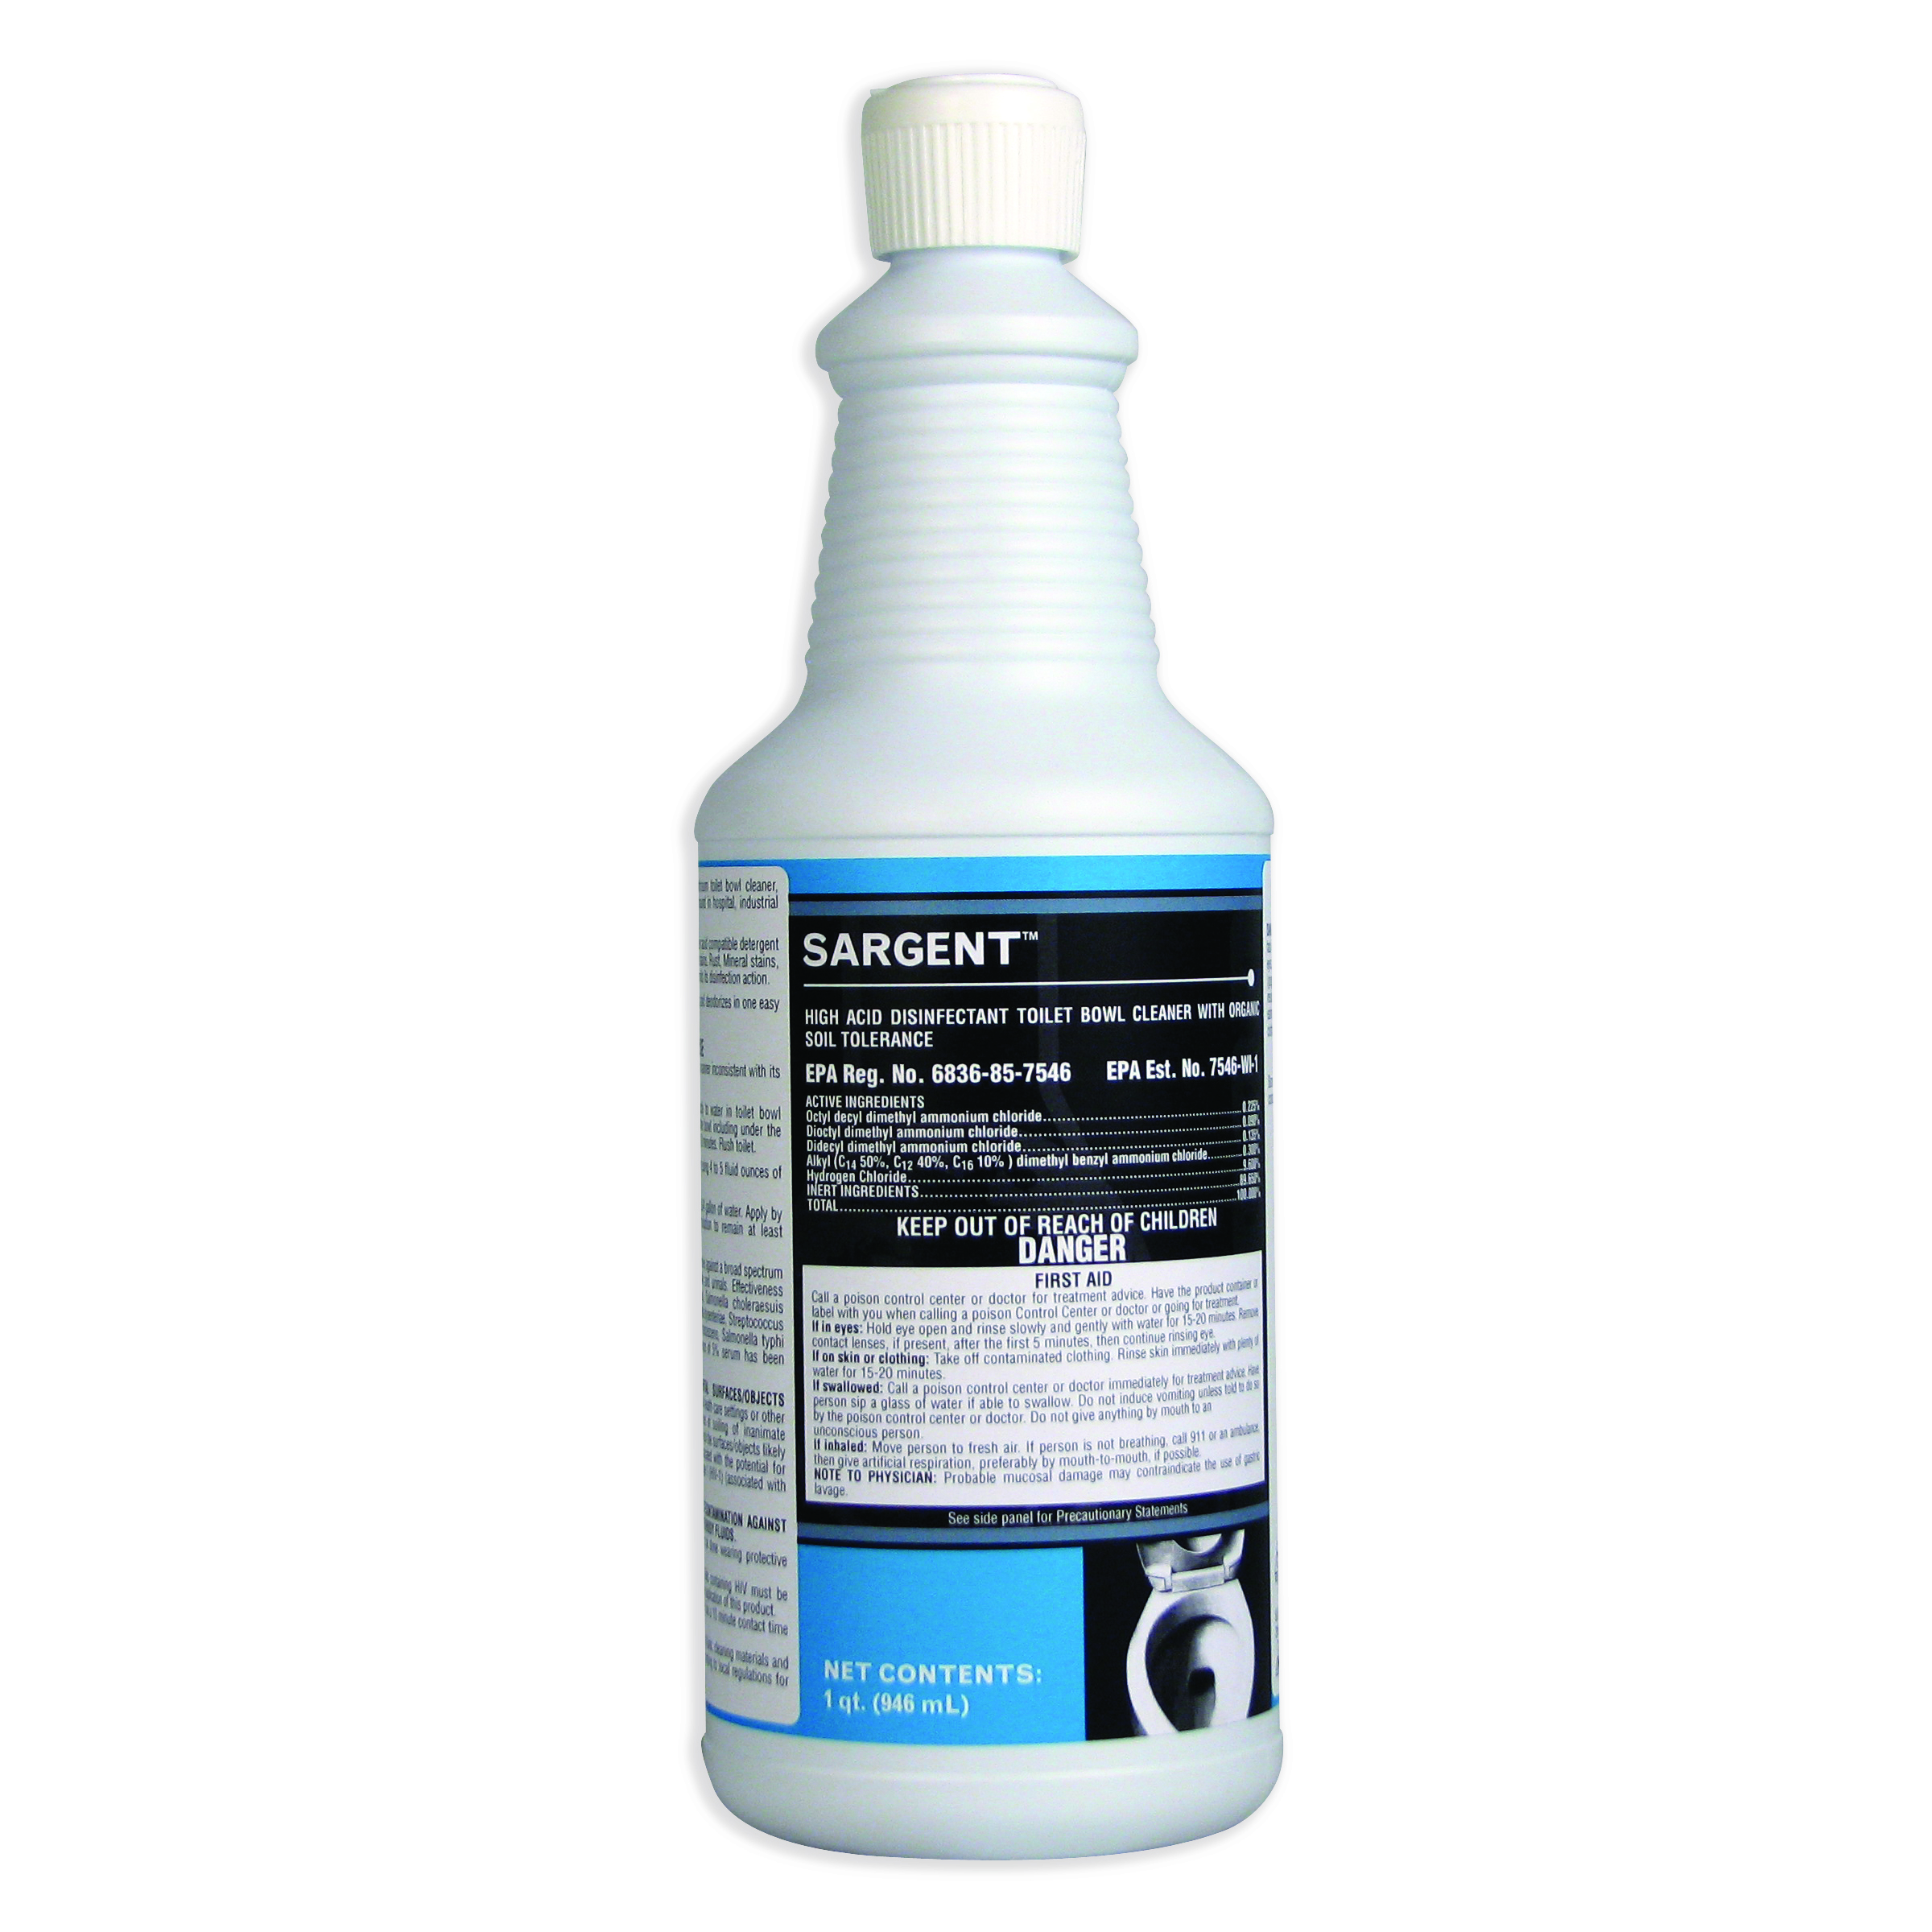 Chemtech® Detail Interior Cleaner – ITW Polymers and Fluids